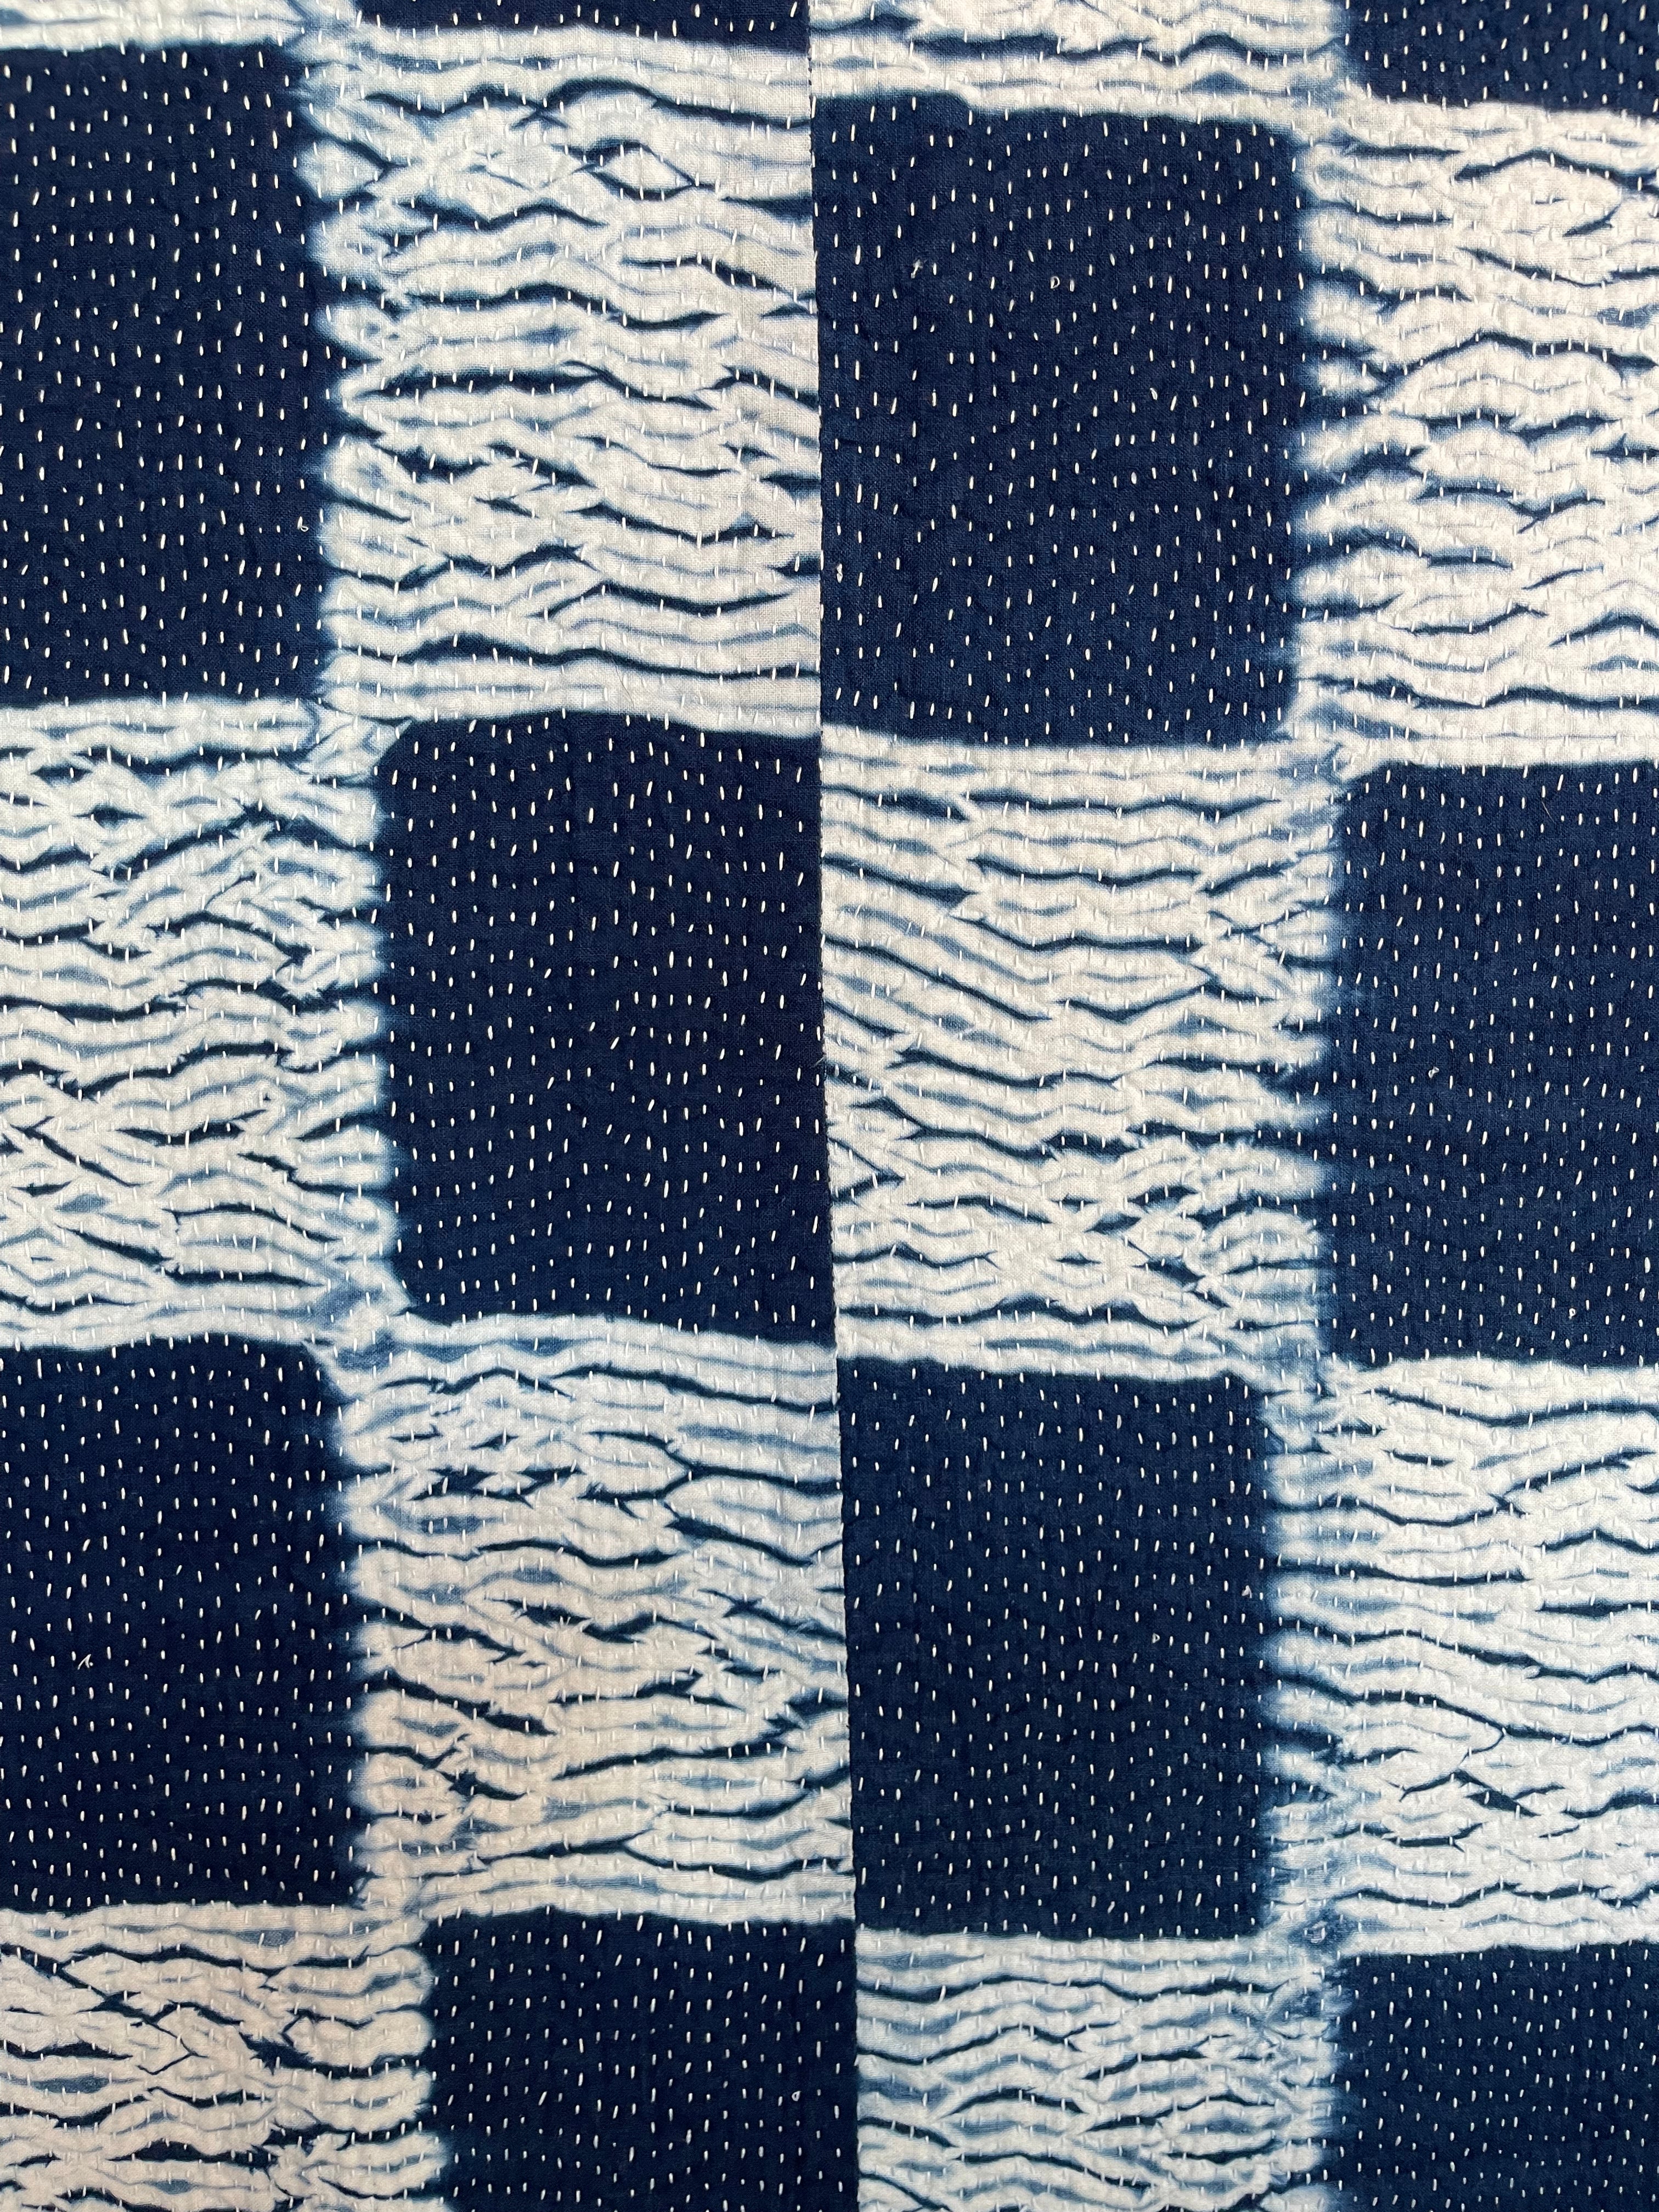 A sunningly beautiful indigo shibori kantha quilt,  made by the artisans of LIVING BLUE. The front a check pattern, the reverse showing fine white hand stitiching on a plain indigo background.